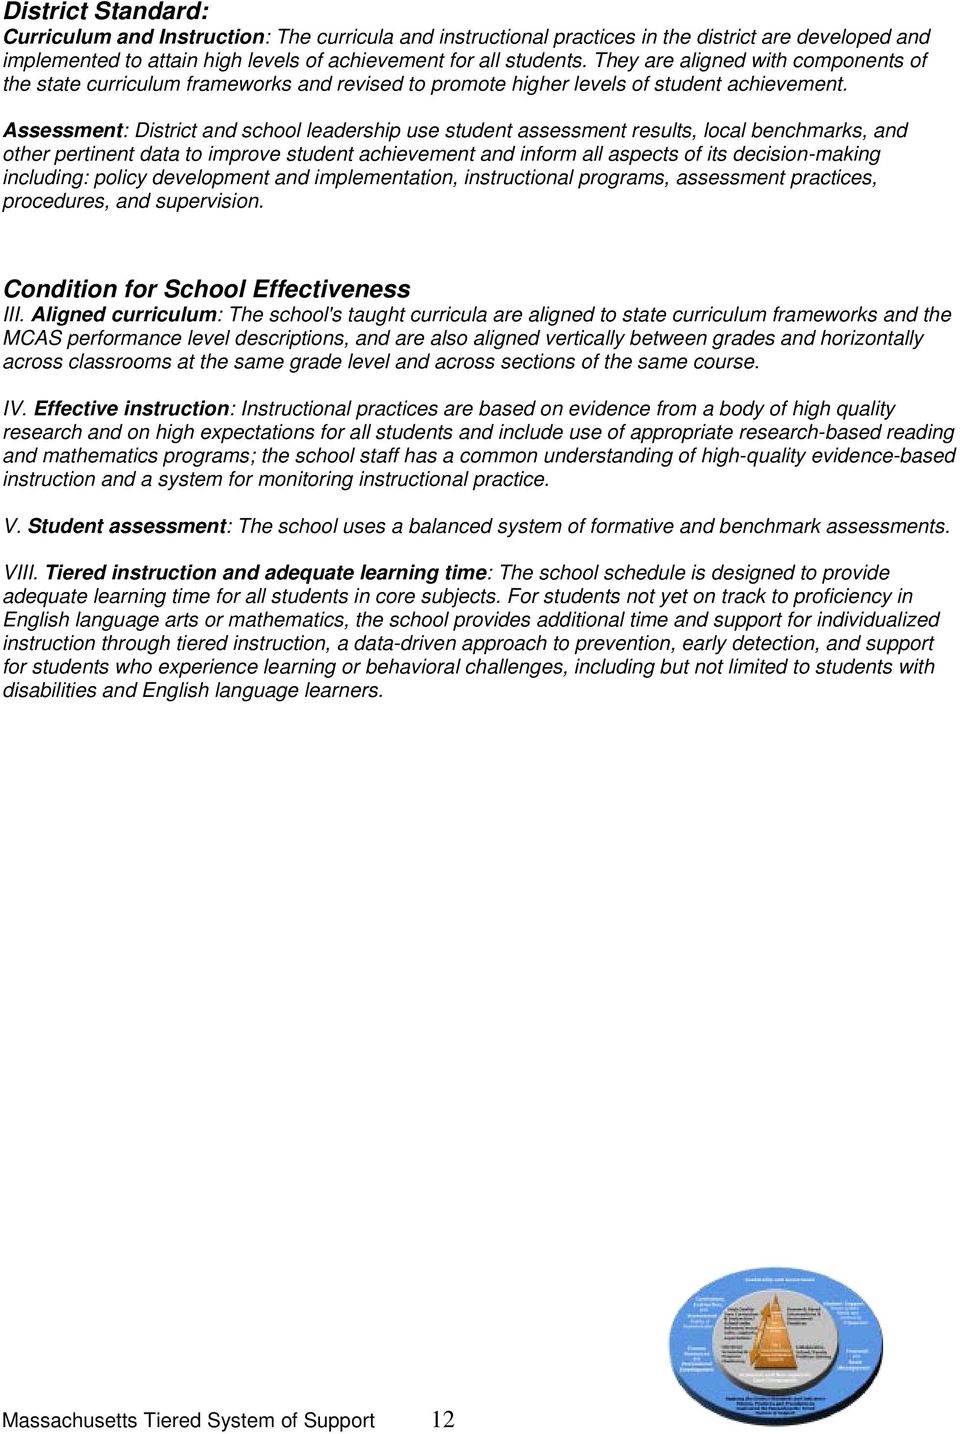 Assessment: District and school leadership use student assessment results, local benchmarks, and other pertinent data to improve student achievement and inform all aspects of its decision-making